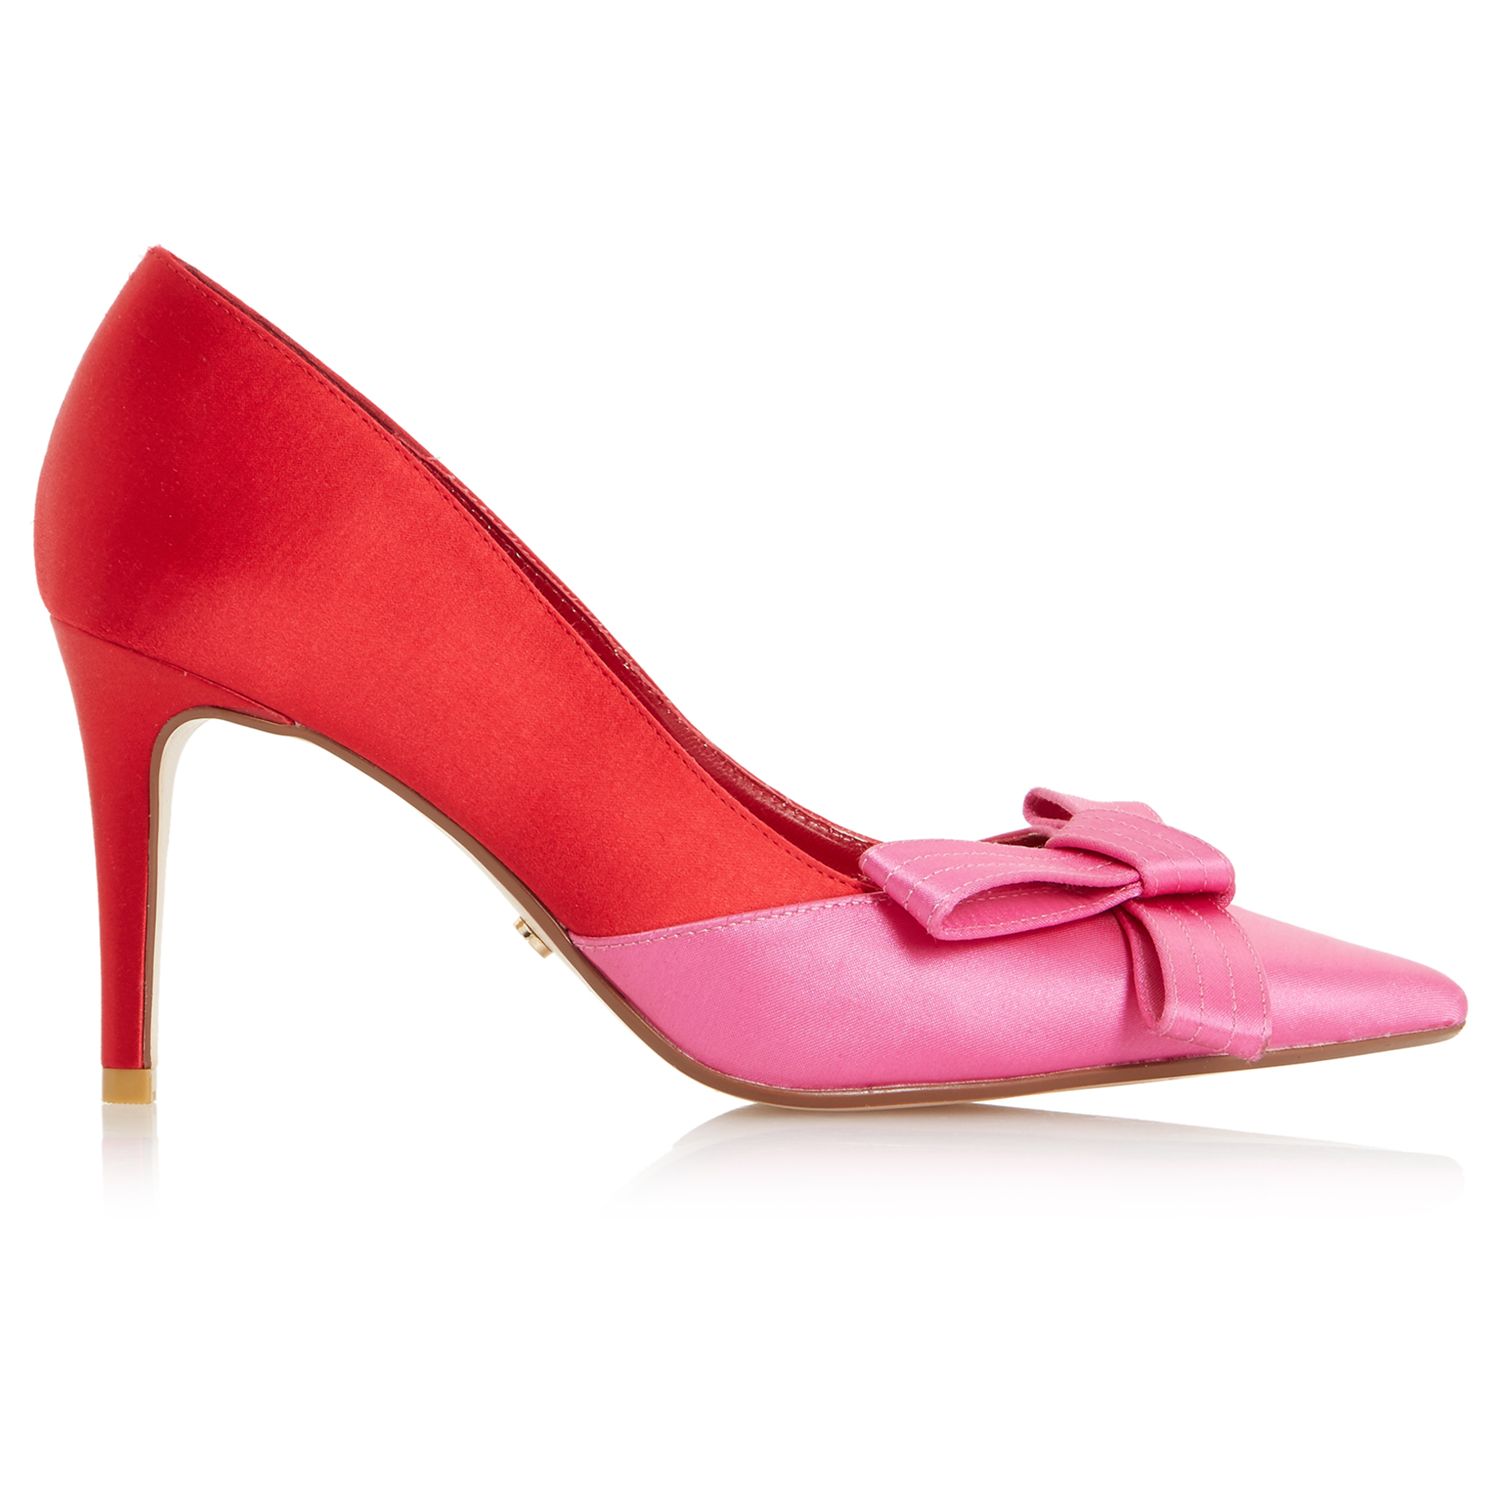 Dune Bowiee Pointed Toe Court Shoes, Red